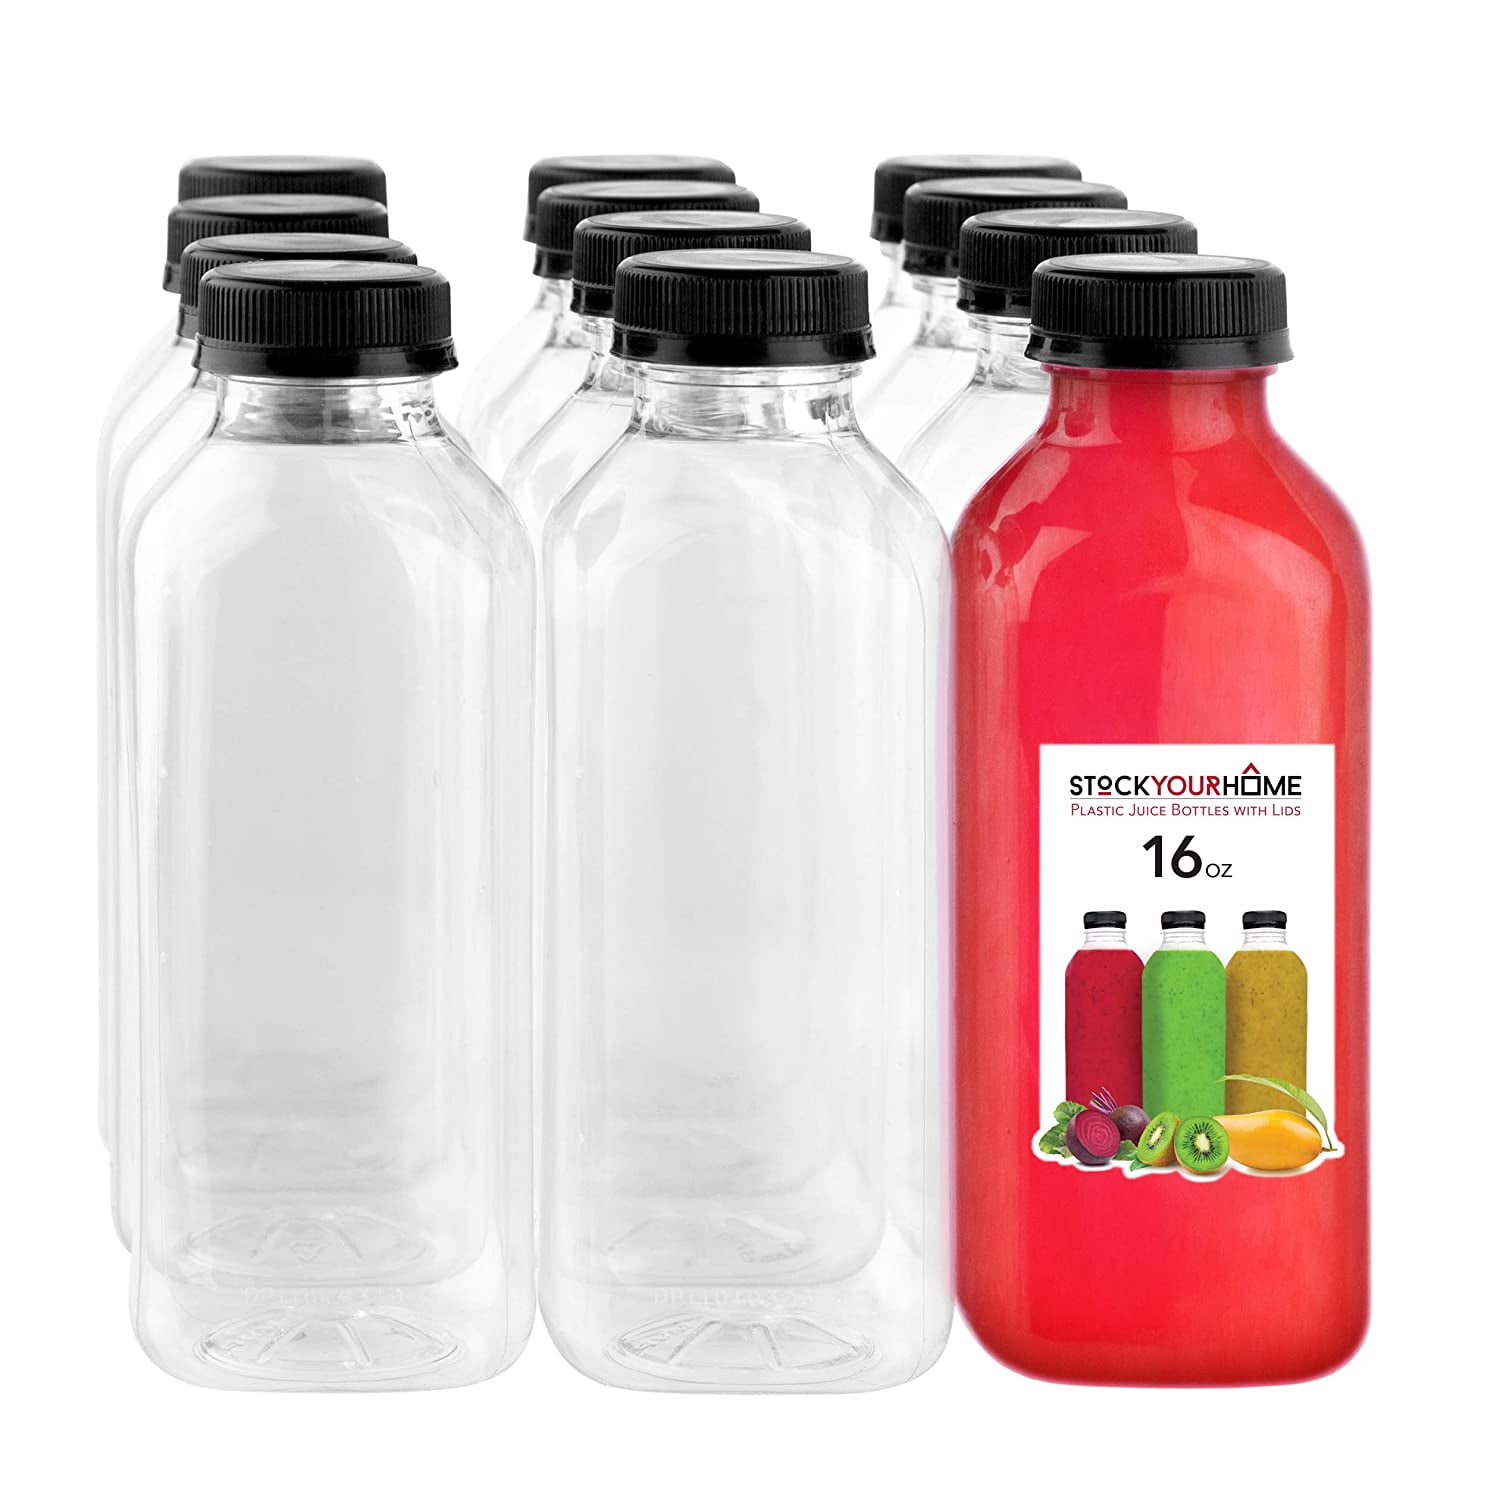 Water Tea and Other Beverages Smoothies Aneco 12 Pack 14 Ounce PET Empty Juice Bottles with Lids Reusable Clear Drink Containers Travel Bottles for Homemade Juices